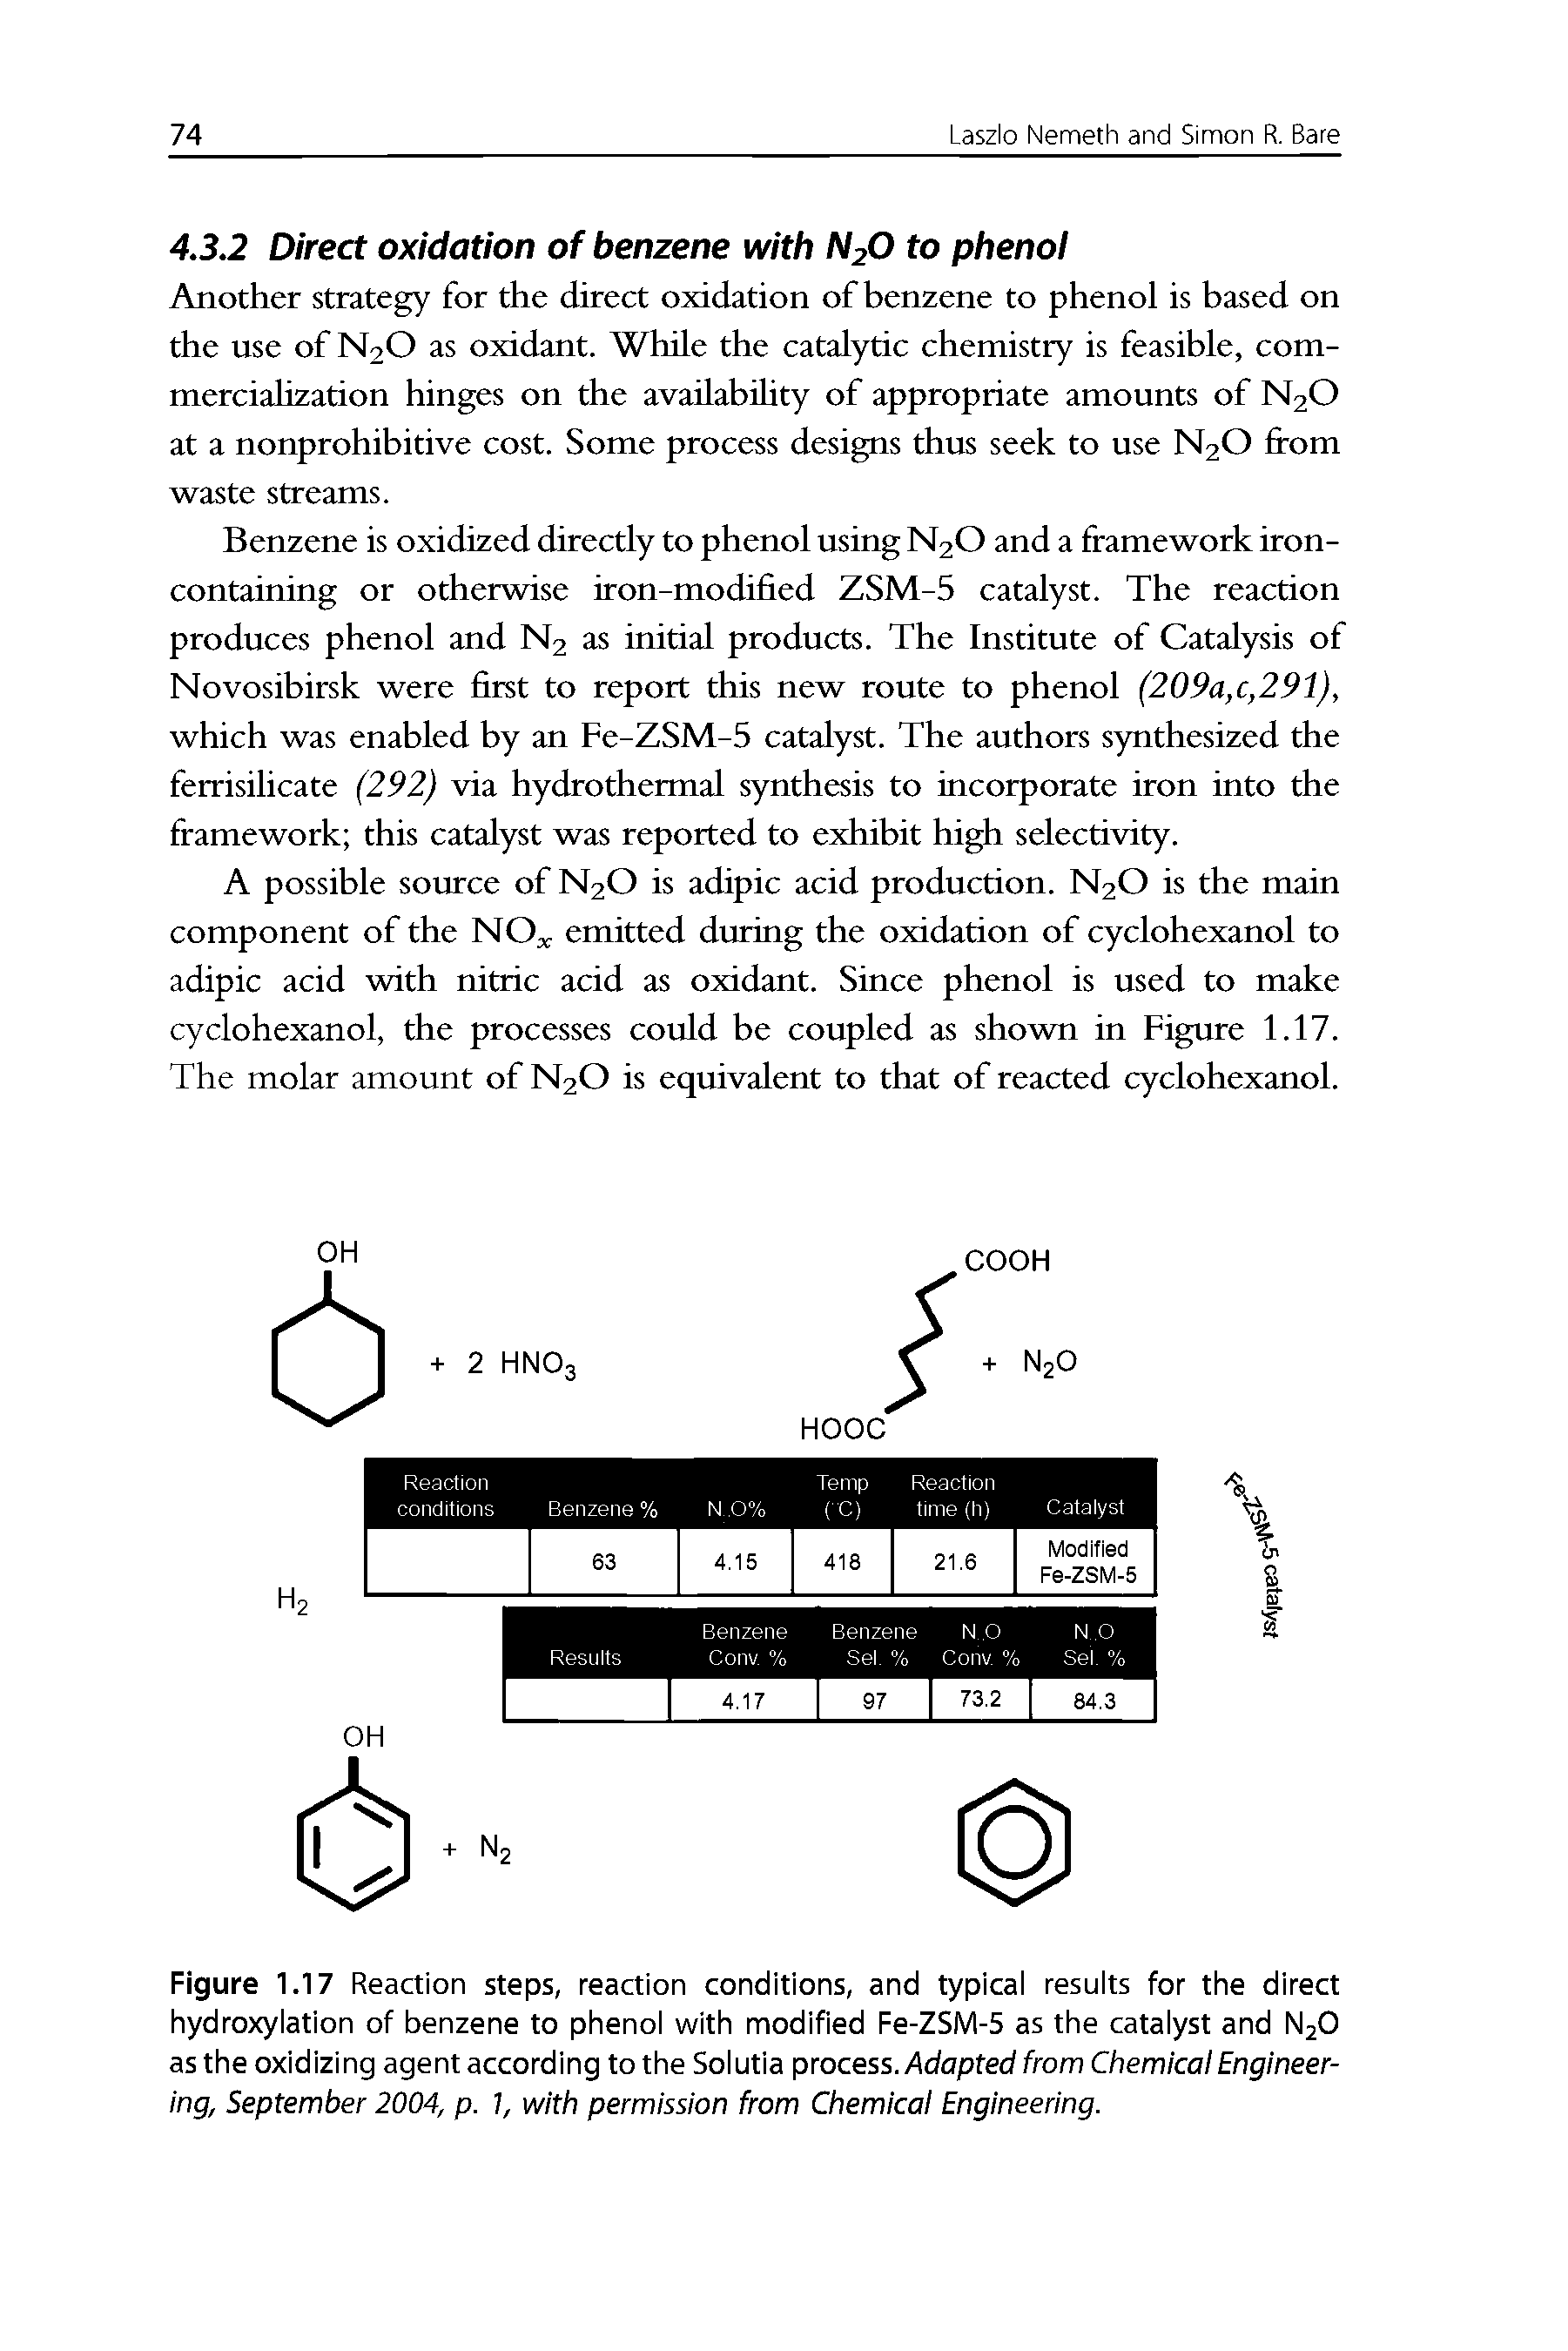 Figure 1.17 Reaction steps, reaction conditions, and typical results for the direct hydroxylation of benzene to phenol with modified Fe-ZSM-5 as the catalyst and NjO as the oxidizing agent according to the Solutia process. Adapted from Chemical Engineering, September 2004, p. i, with permission from Chemical Engineering.